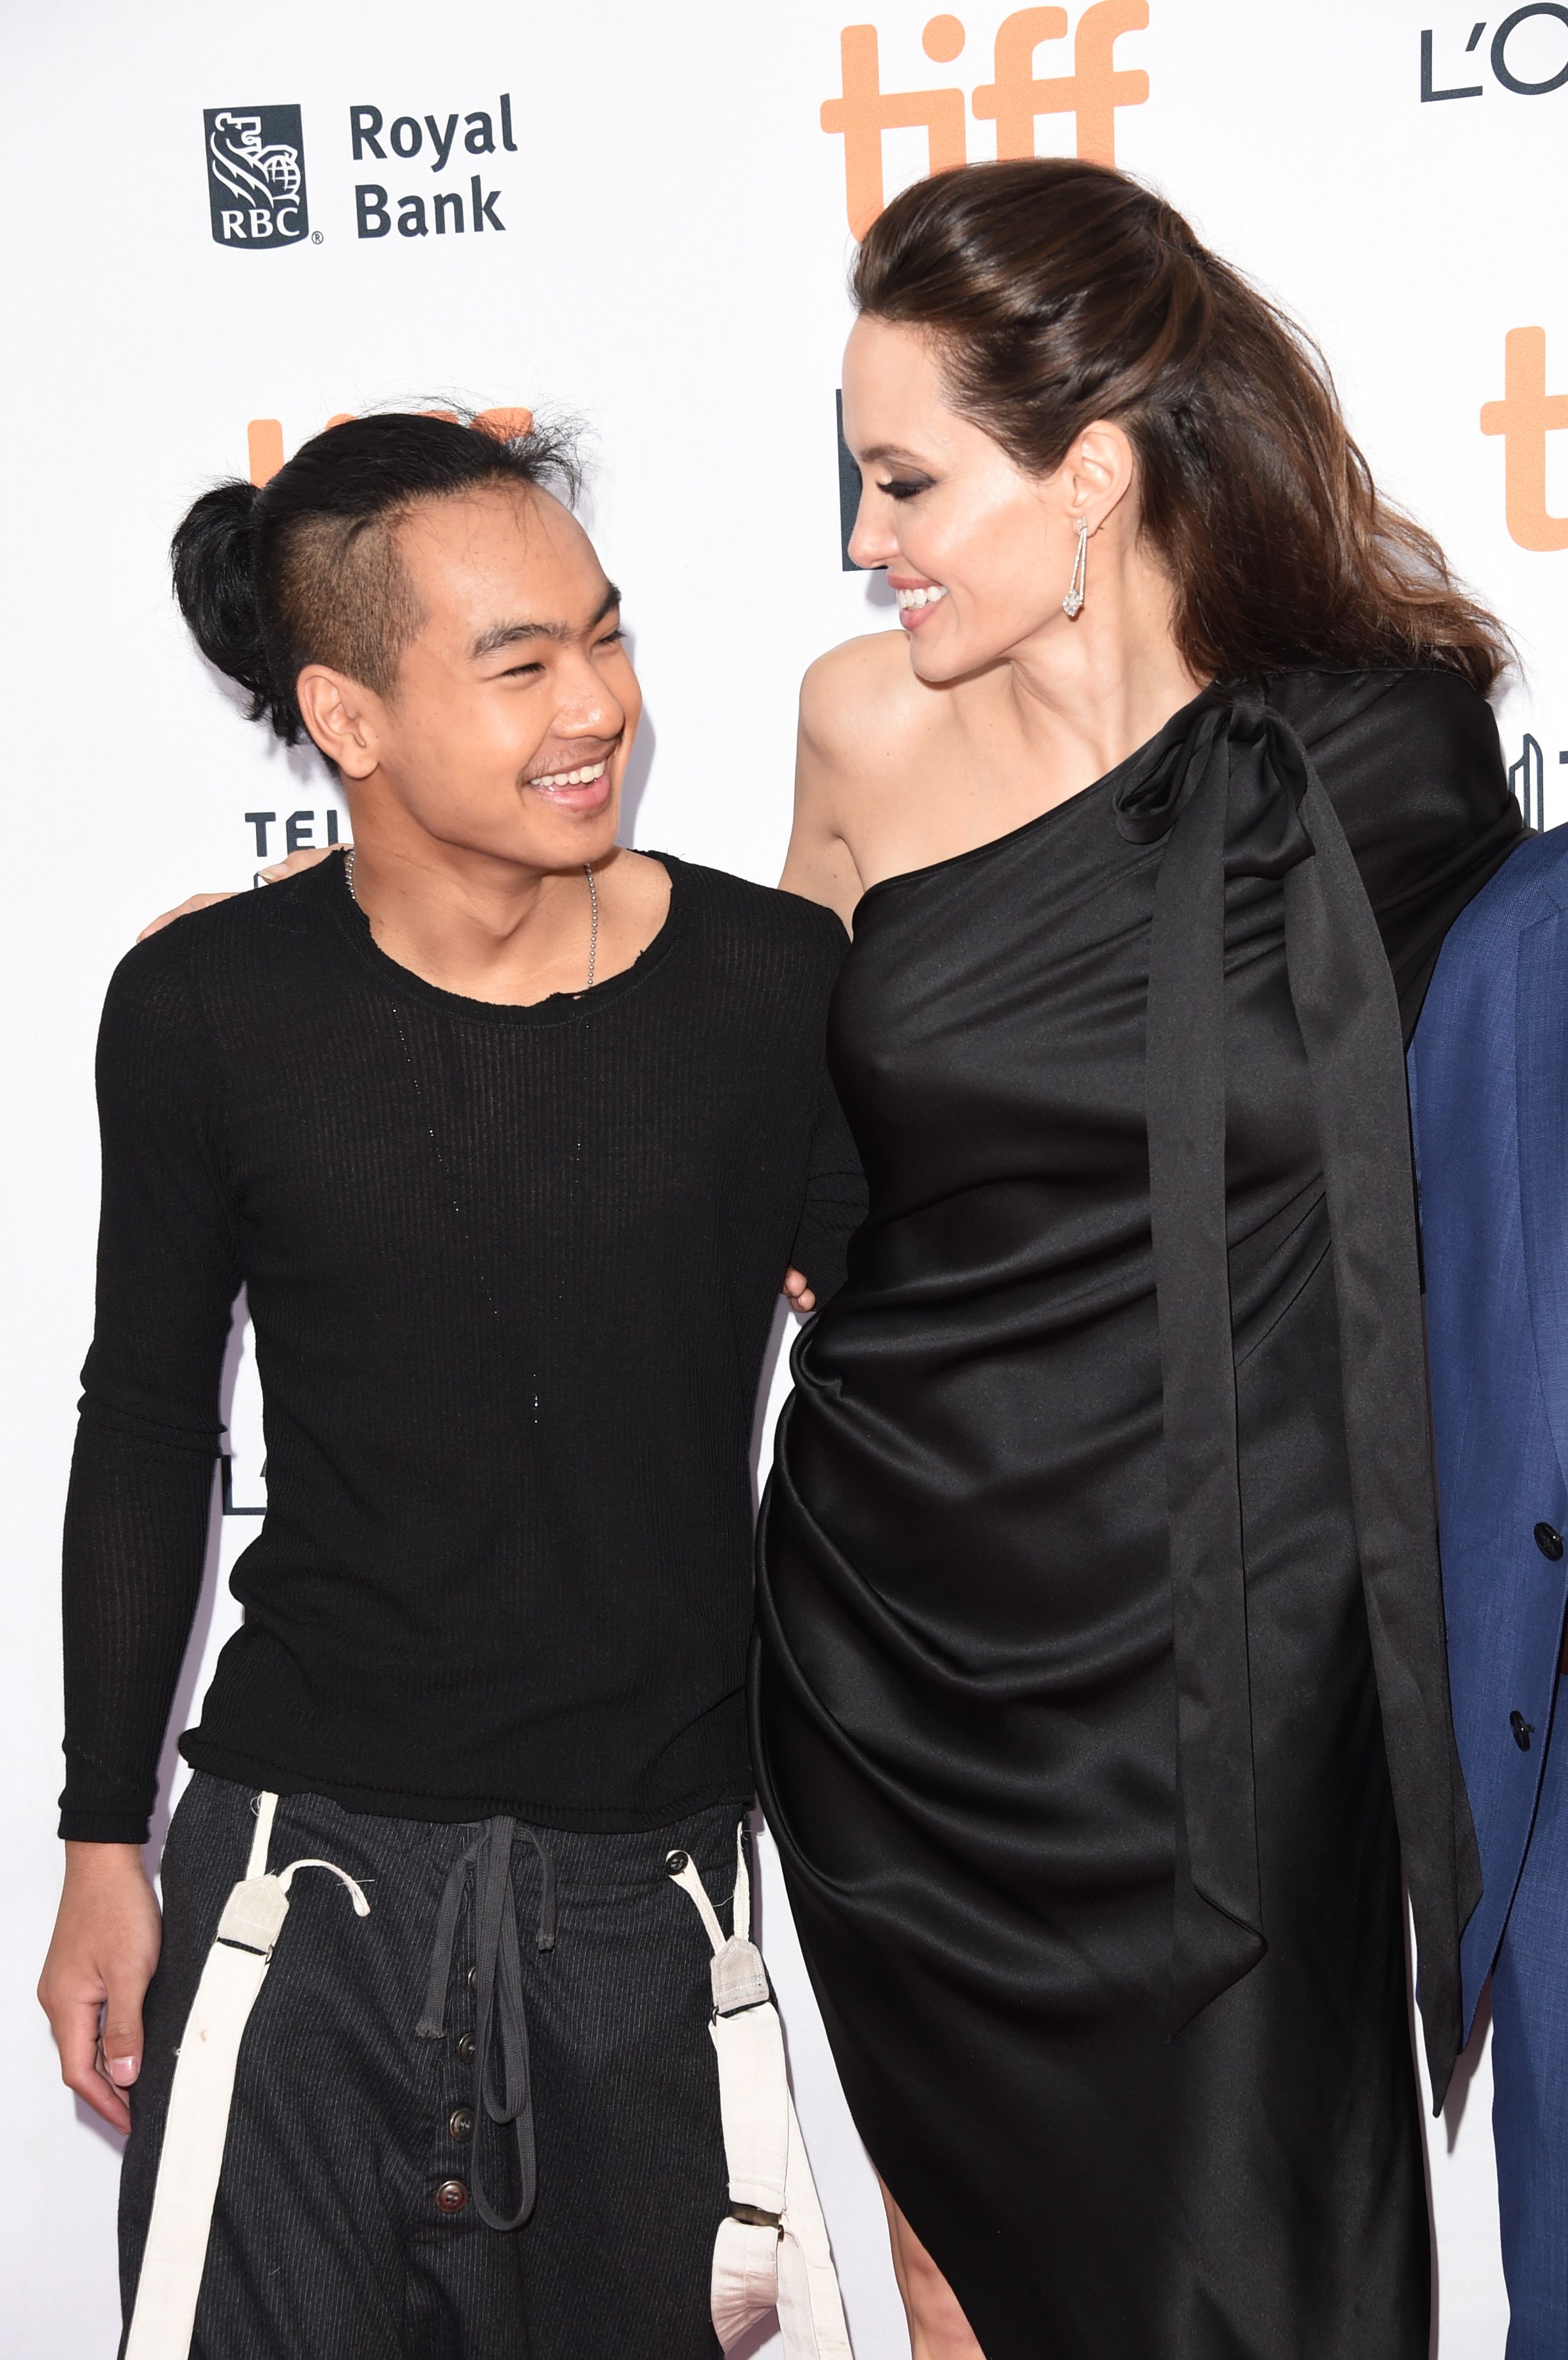 Watch Angelina Jolie Get Emotional While Taking Son To College